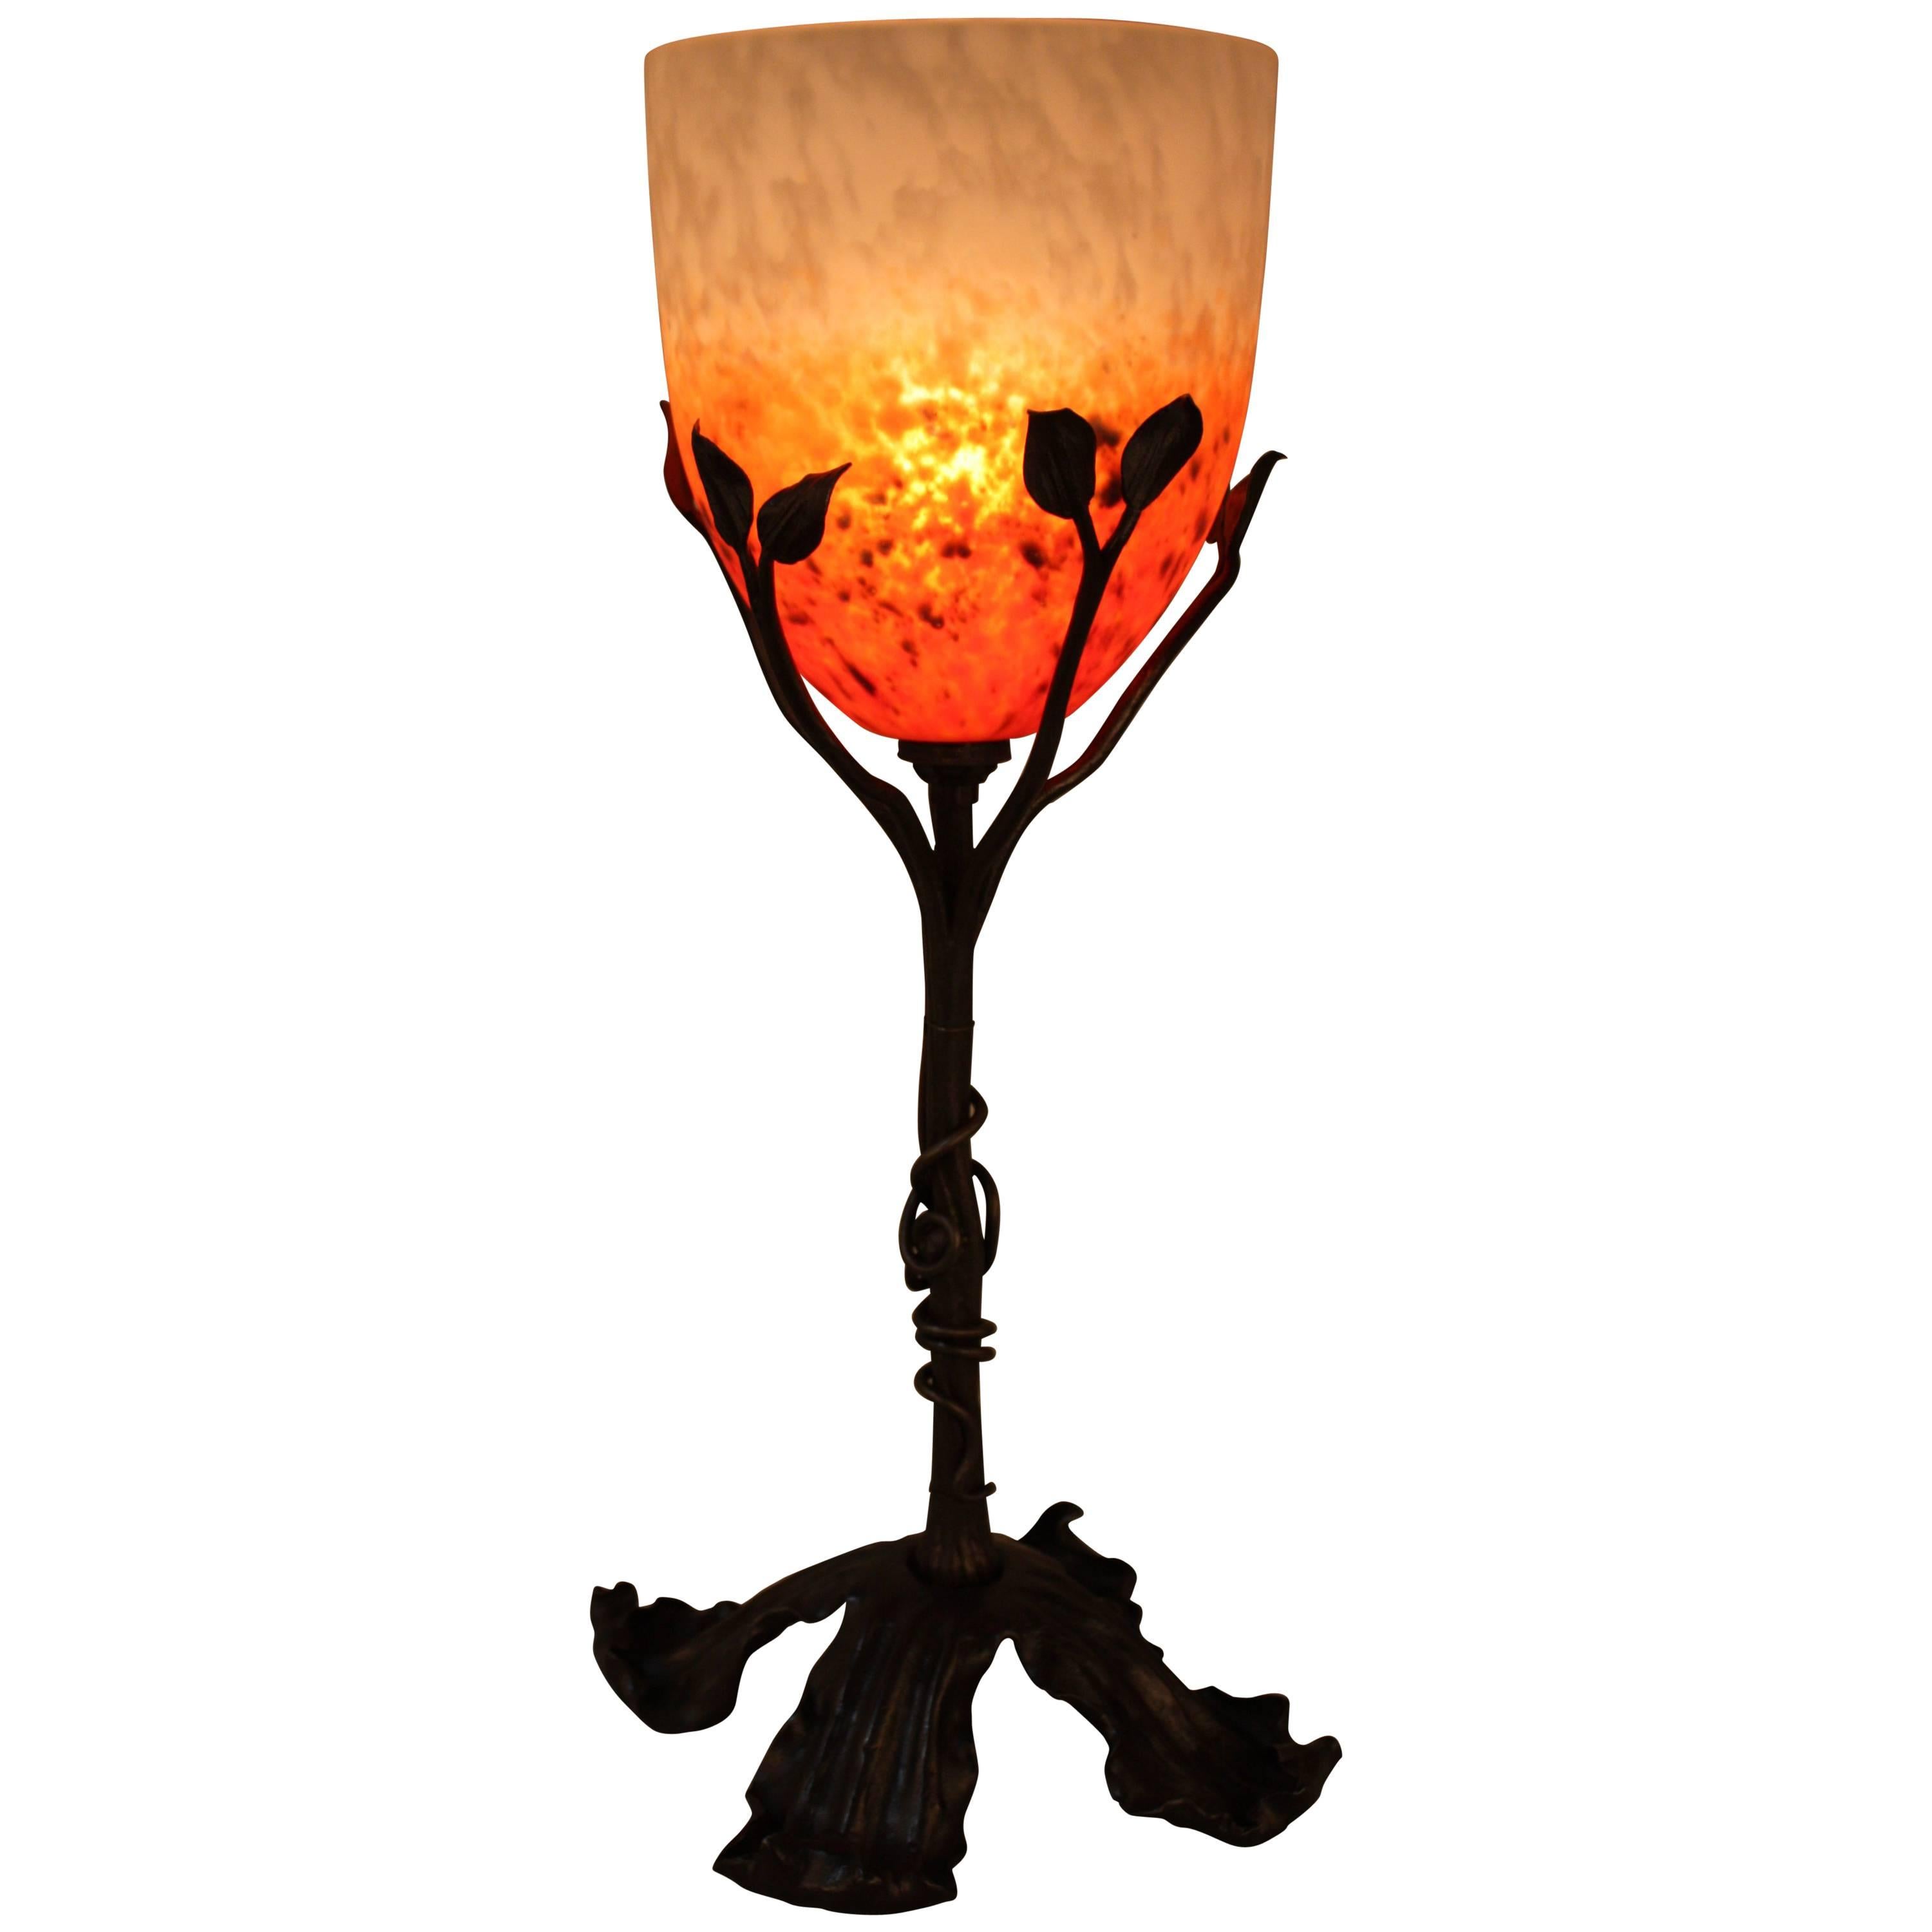 French Art Nouveau Table Lamp by Charles Schneider